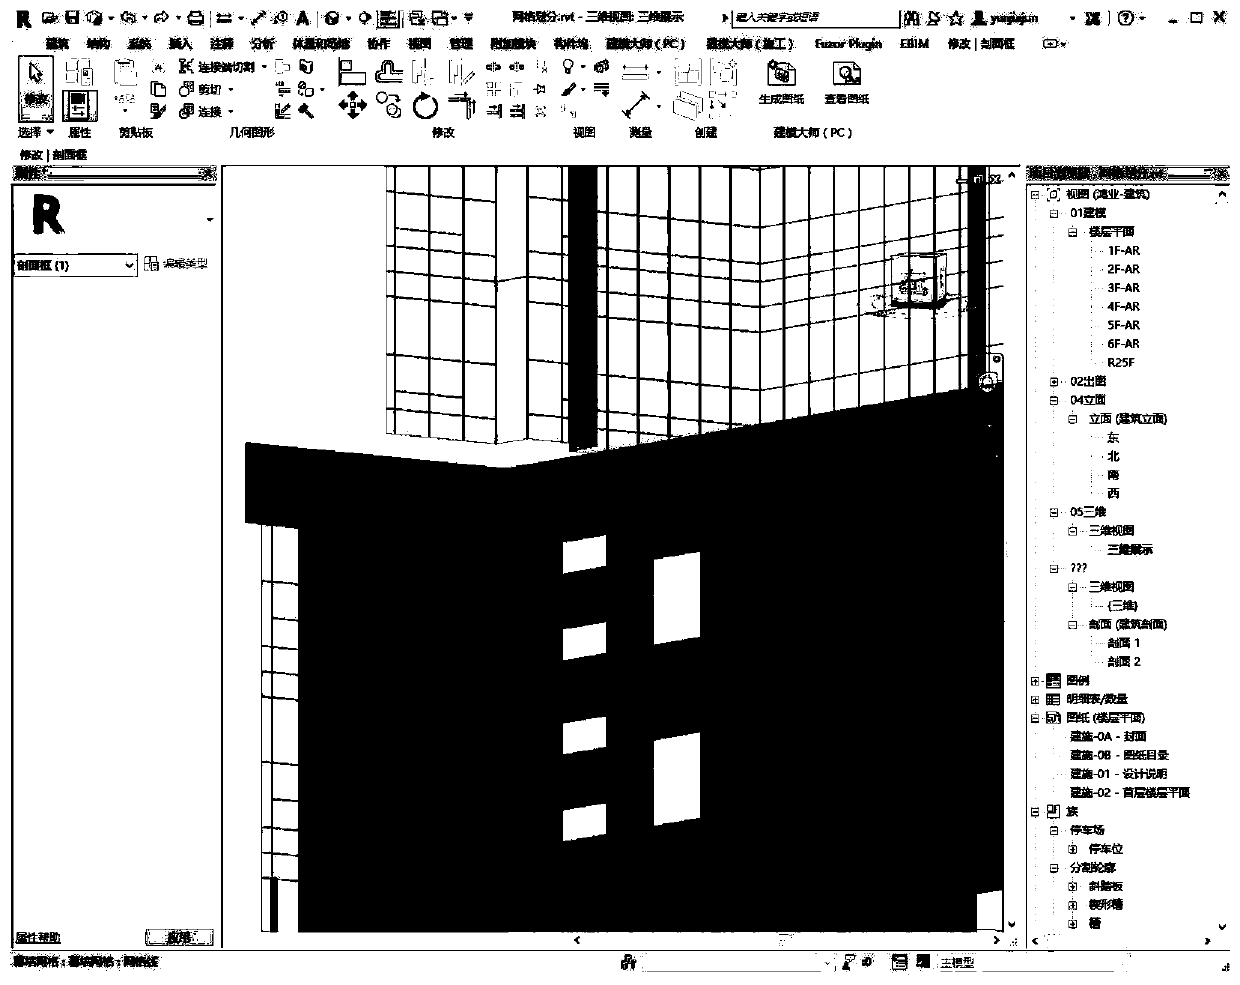 Curtain wall production and processing method based on BIM technology